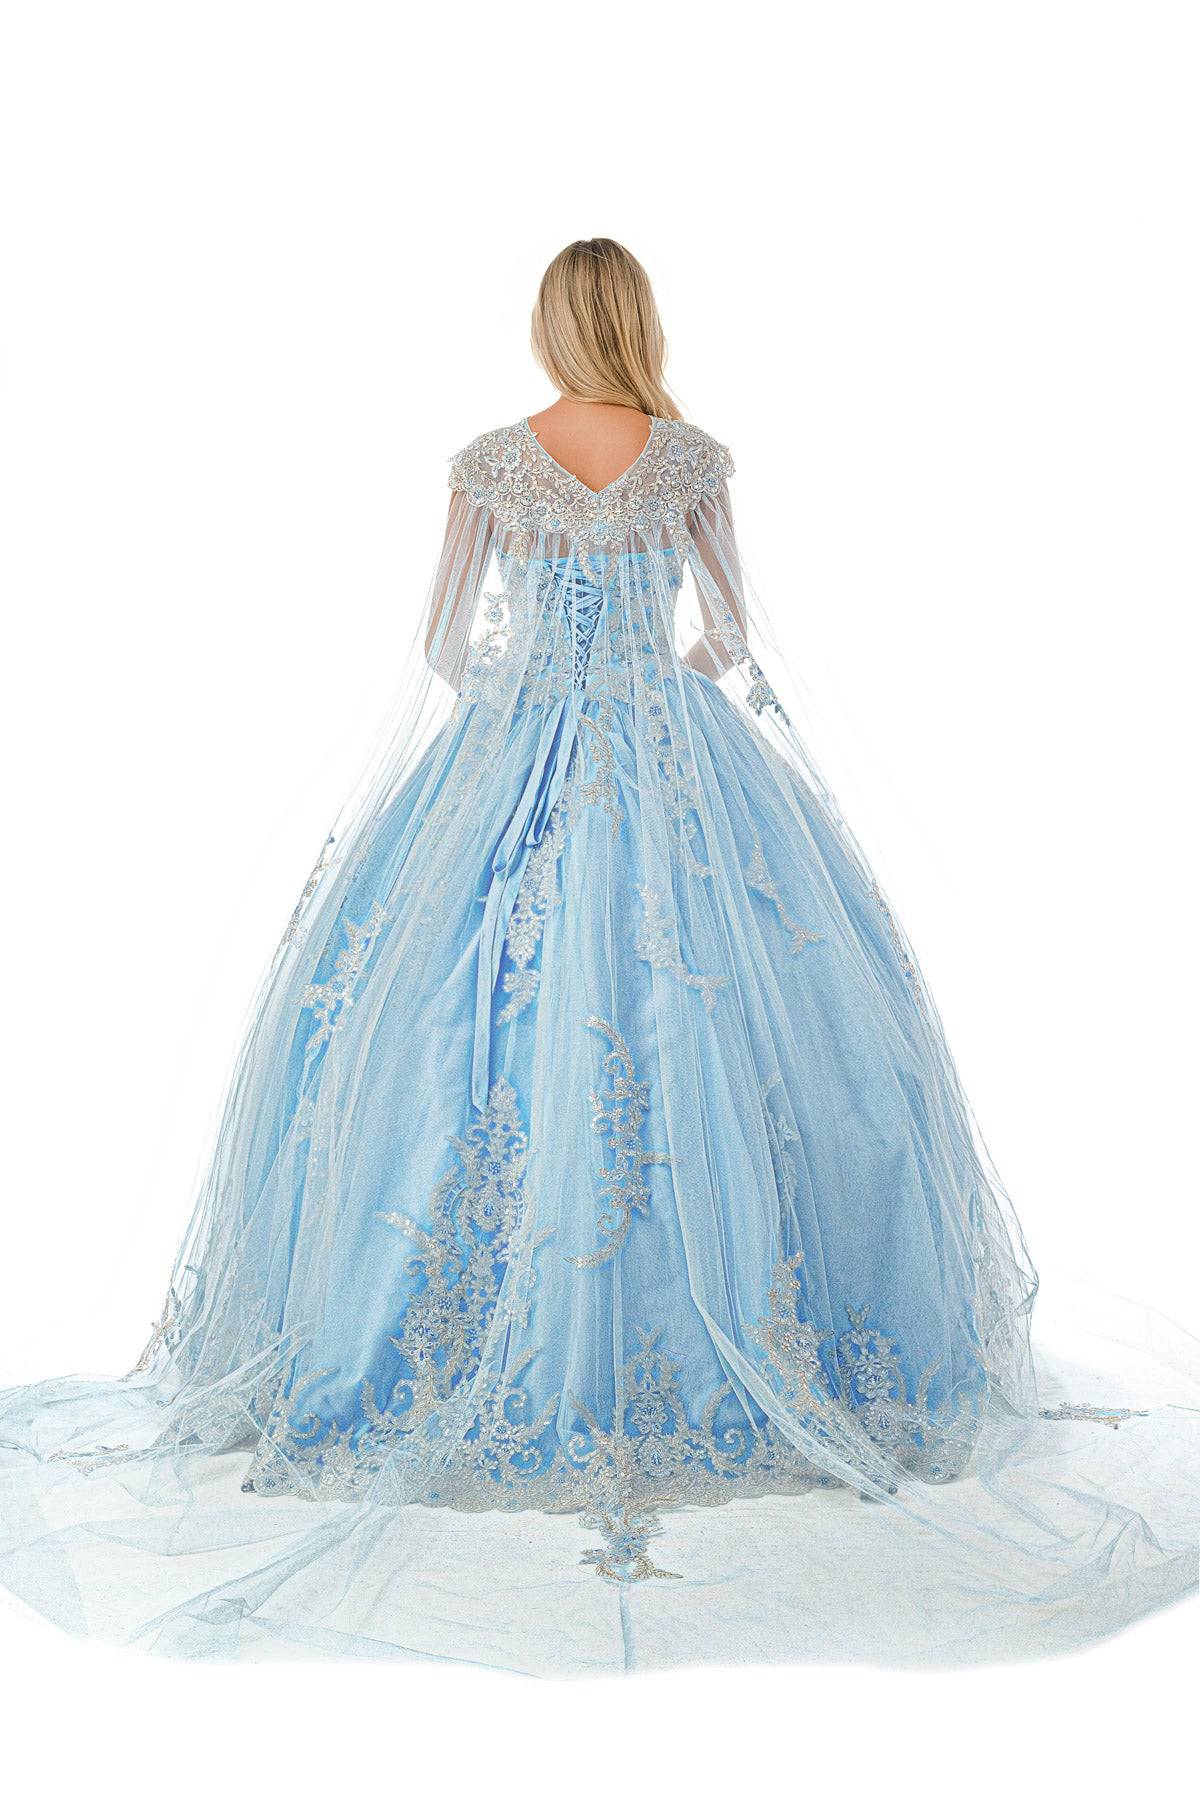 Aspeed L2726 Crystal Stone Embroidered Quinceanera Dress - NORMA REED